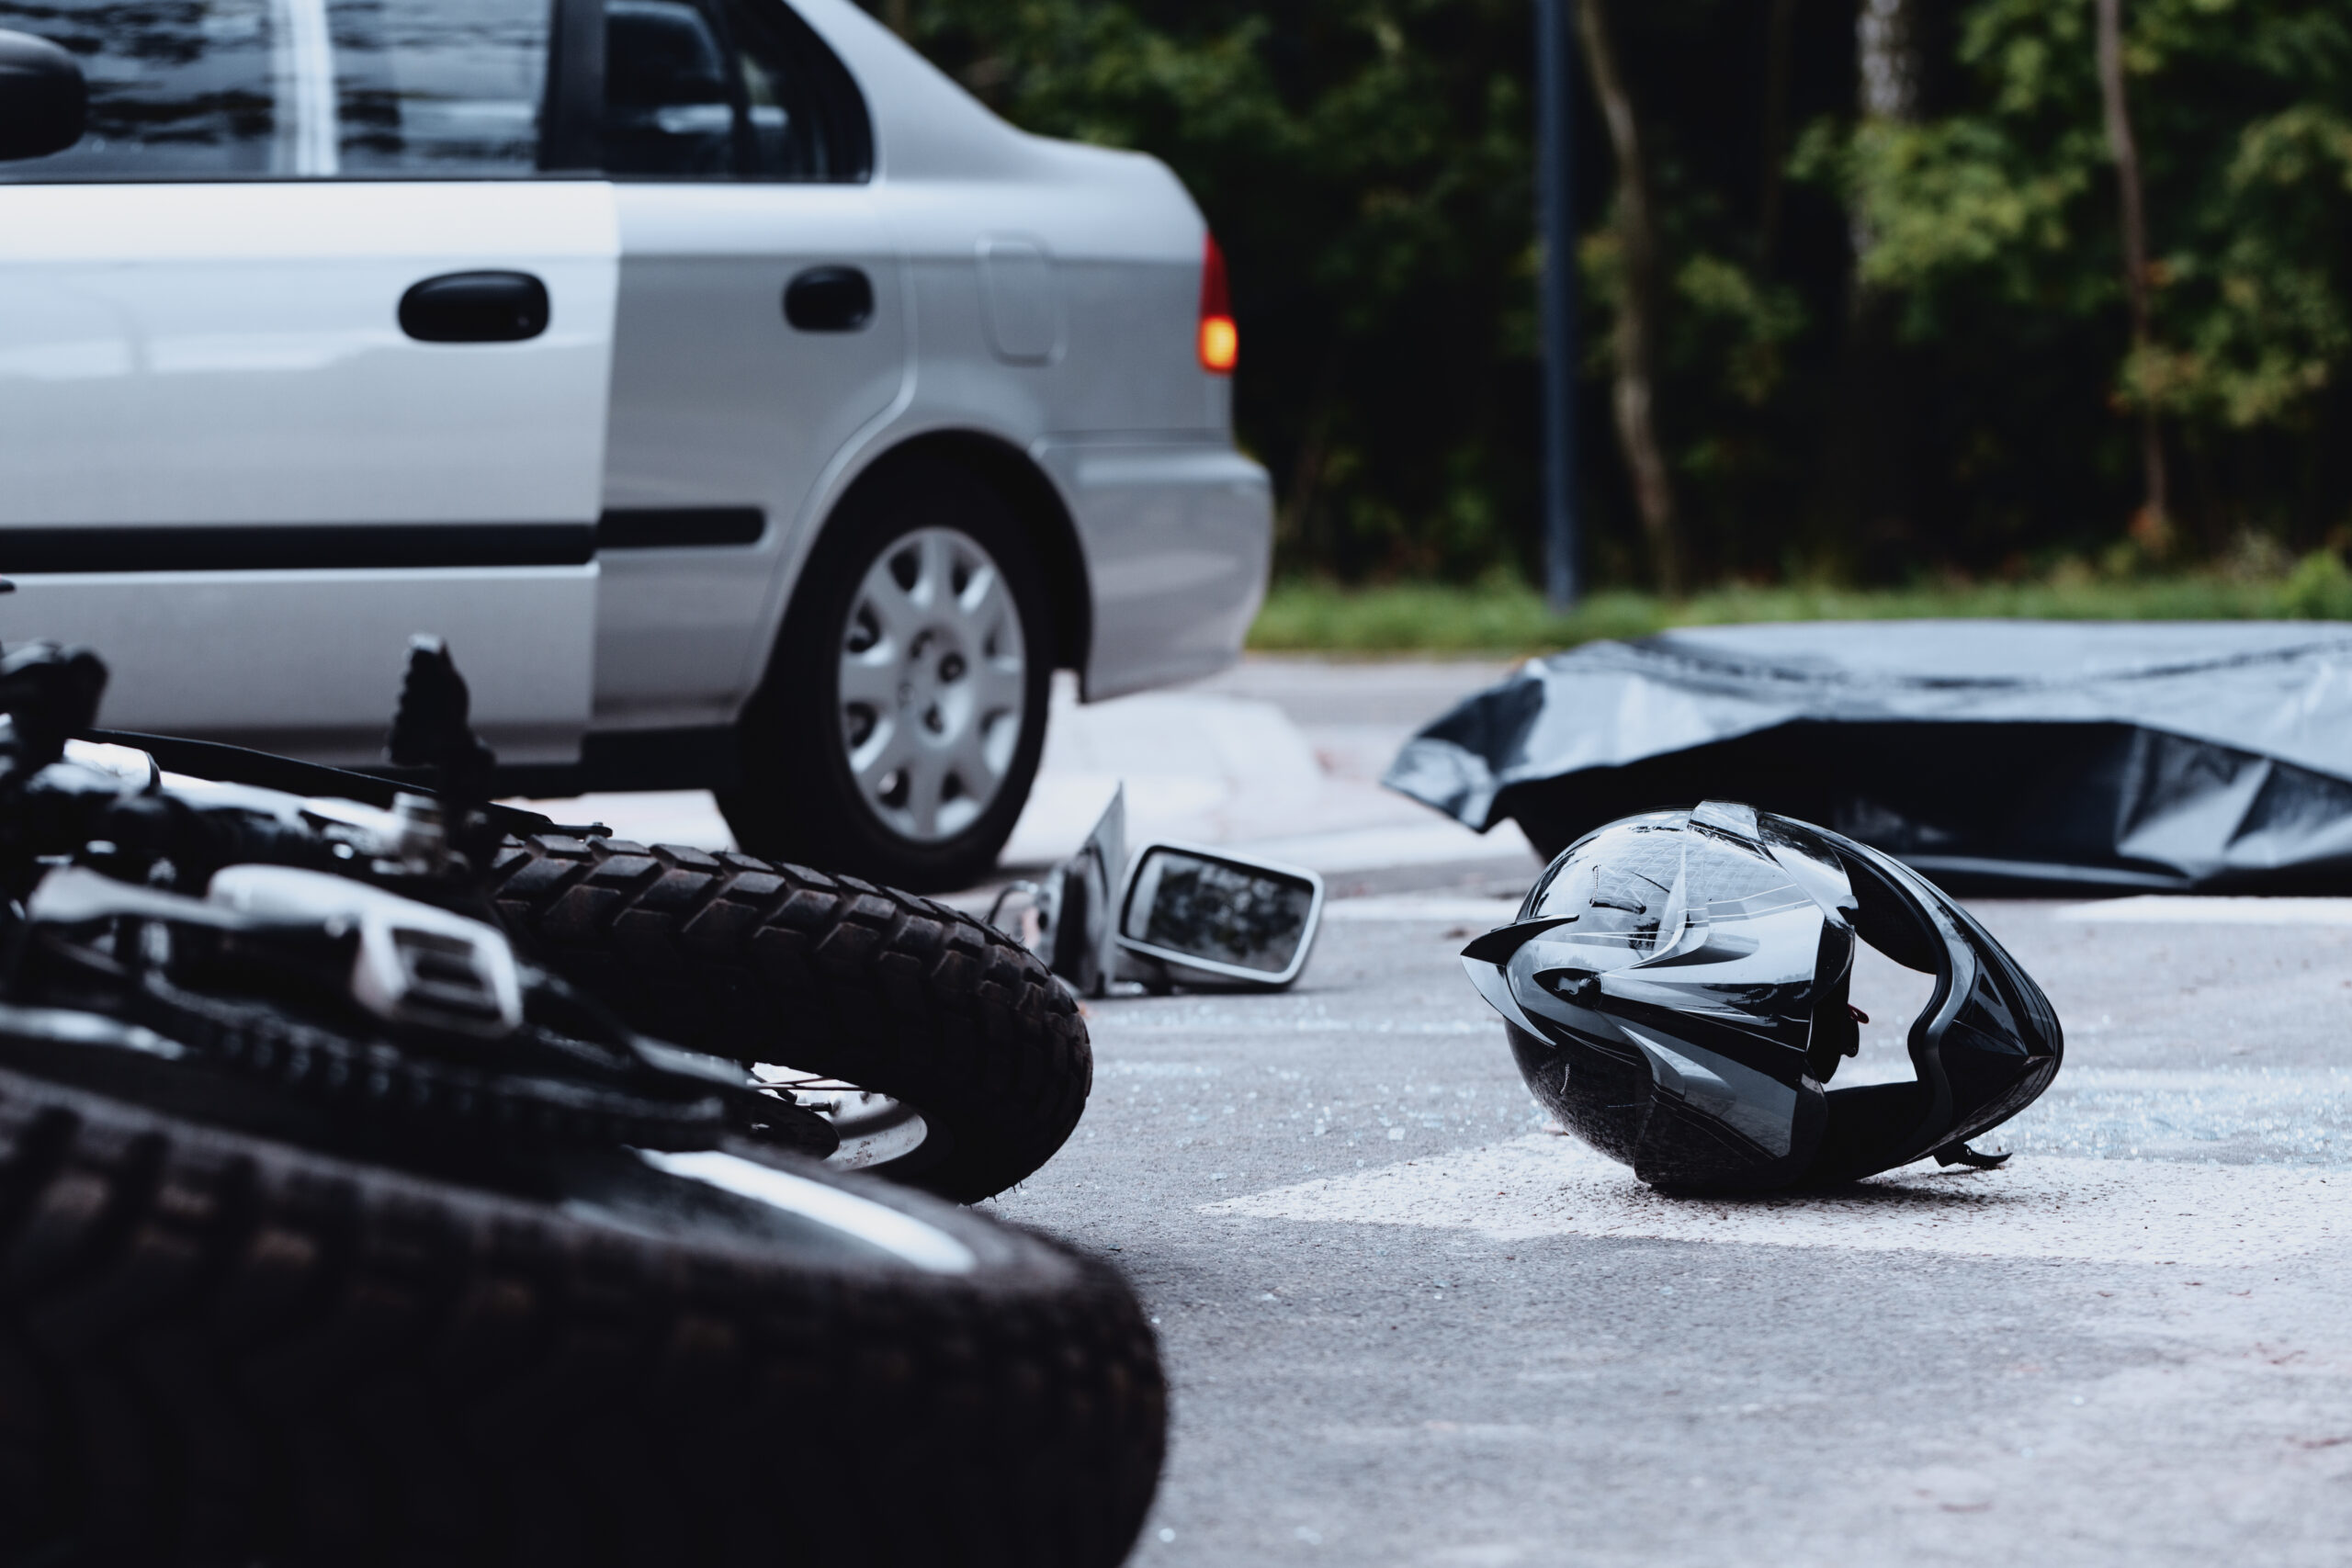 Florida's Statute of Limitations For Motorcycle Accident Injuries